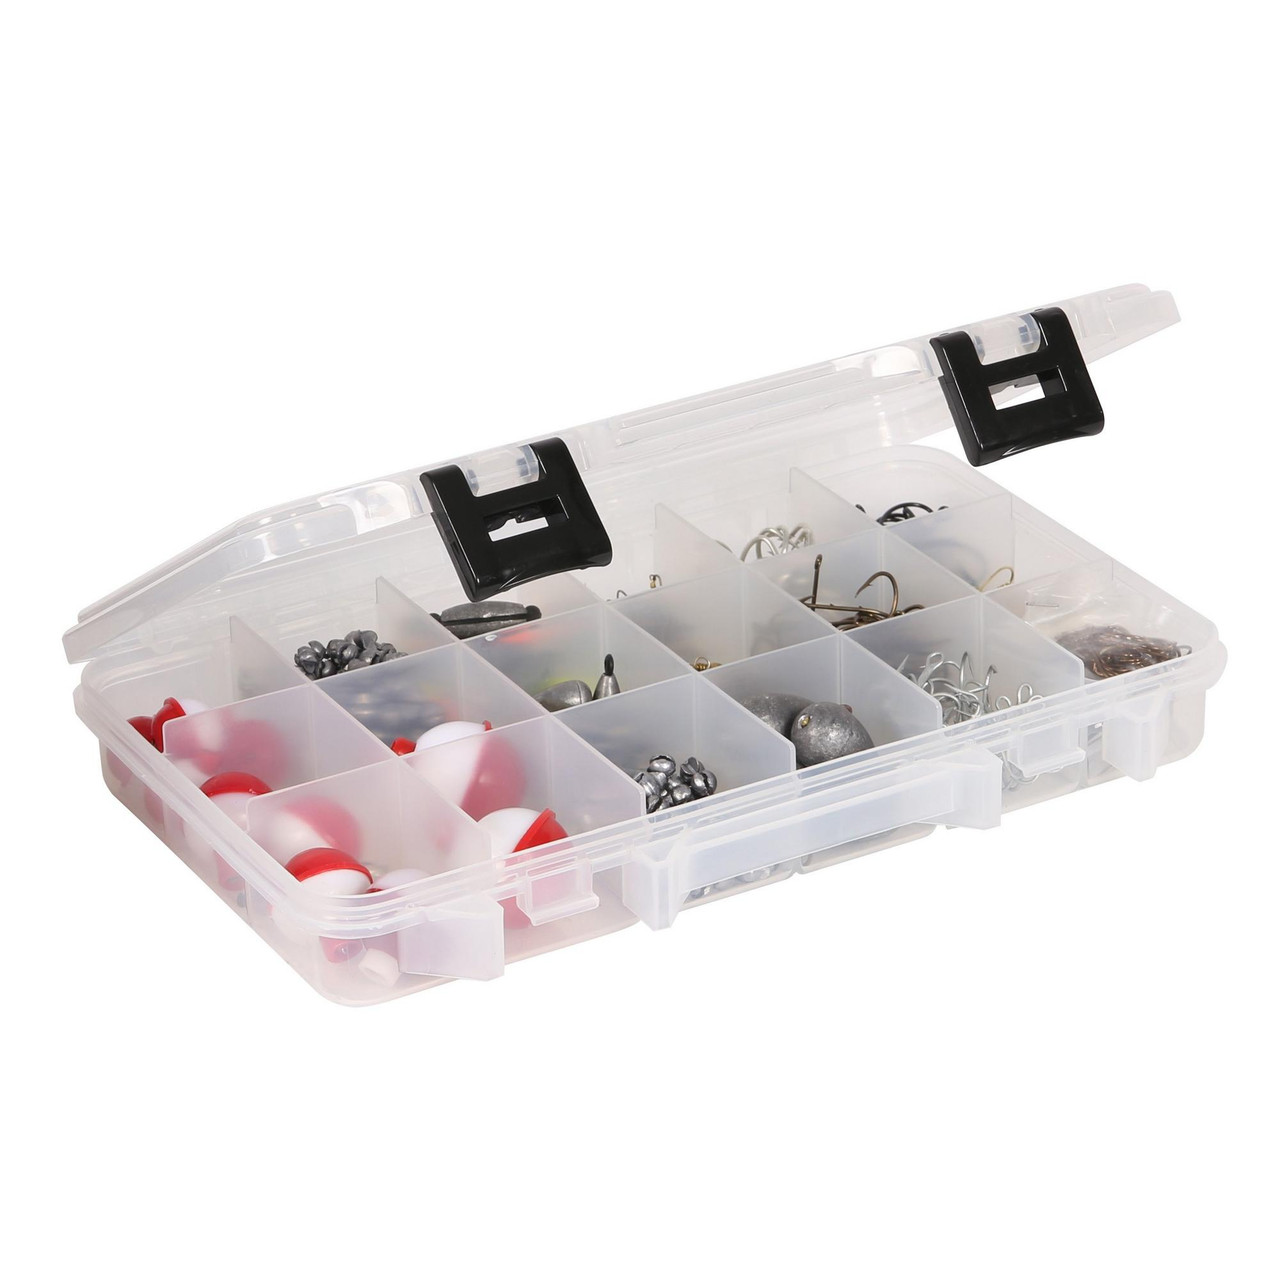 Plano Prolatch Stowaway 3600 Tackle Box - 18 Fixed Compartments